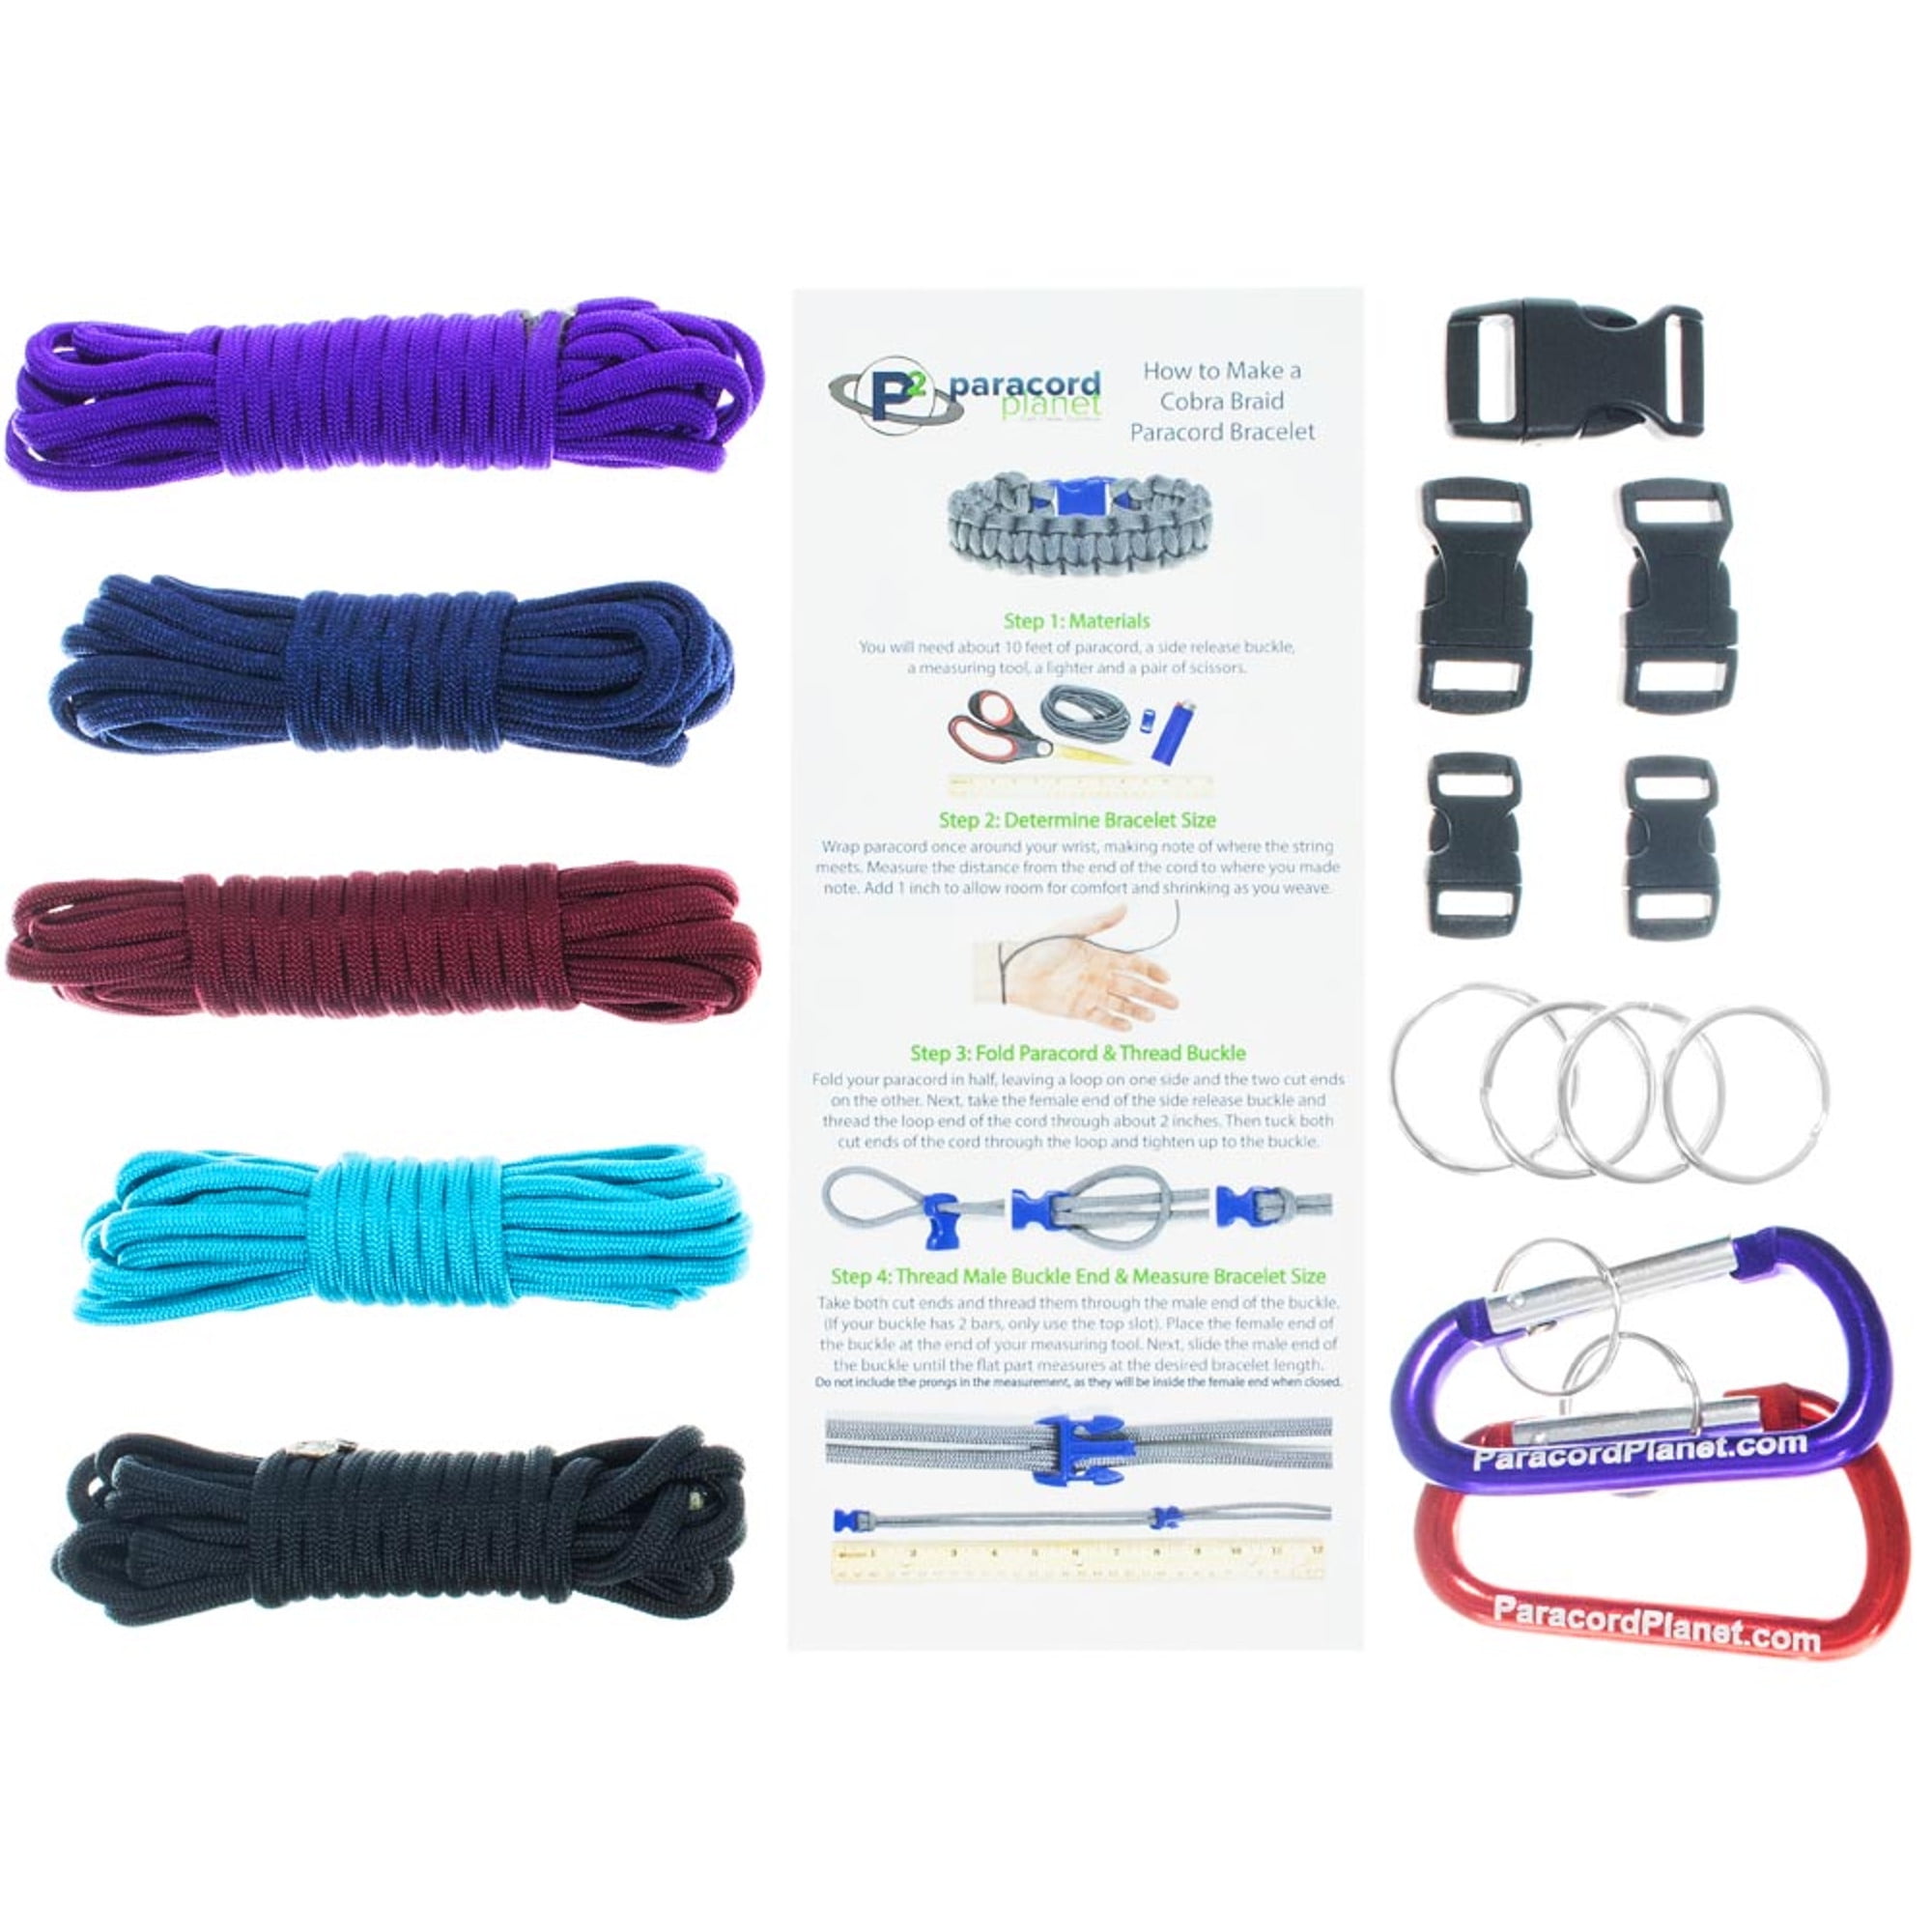 Break Away Buckles for Paracord Bracelets Great for Parachute Cord Projects! 